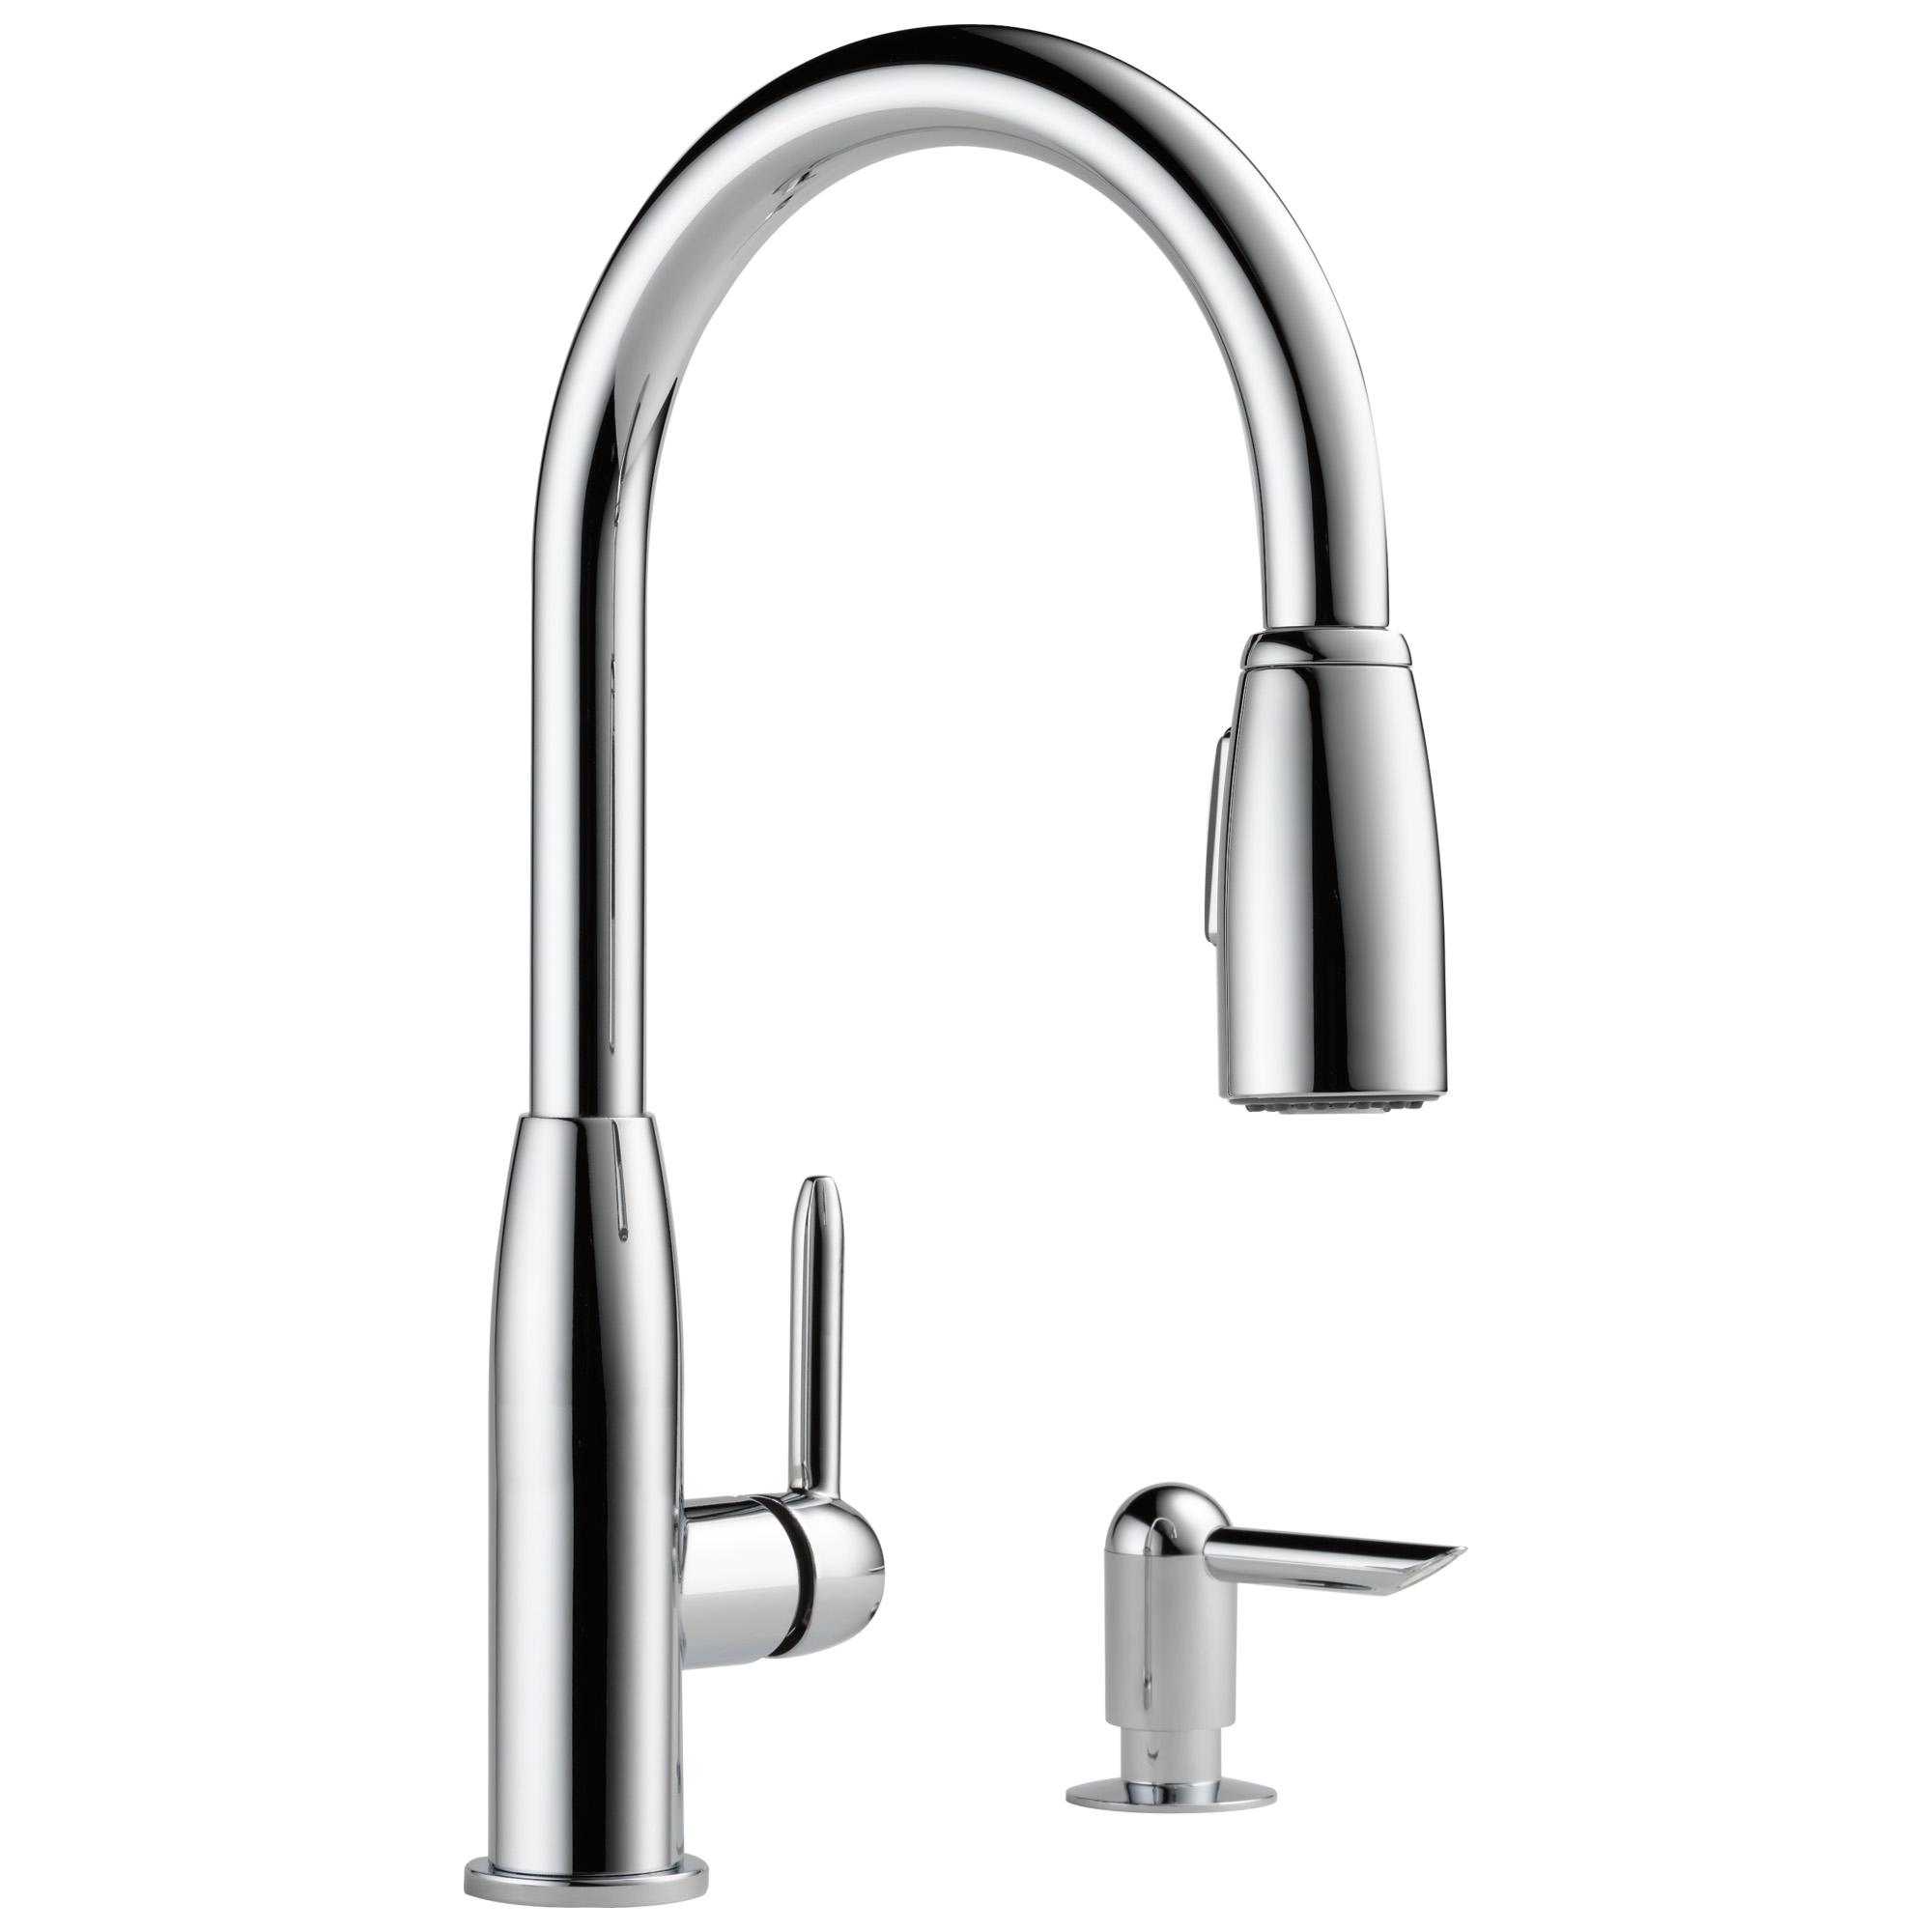 Peerless Core Kitchen Single Handle Pull-Down Chrome Faucet for $42 Shipped